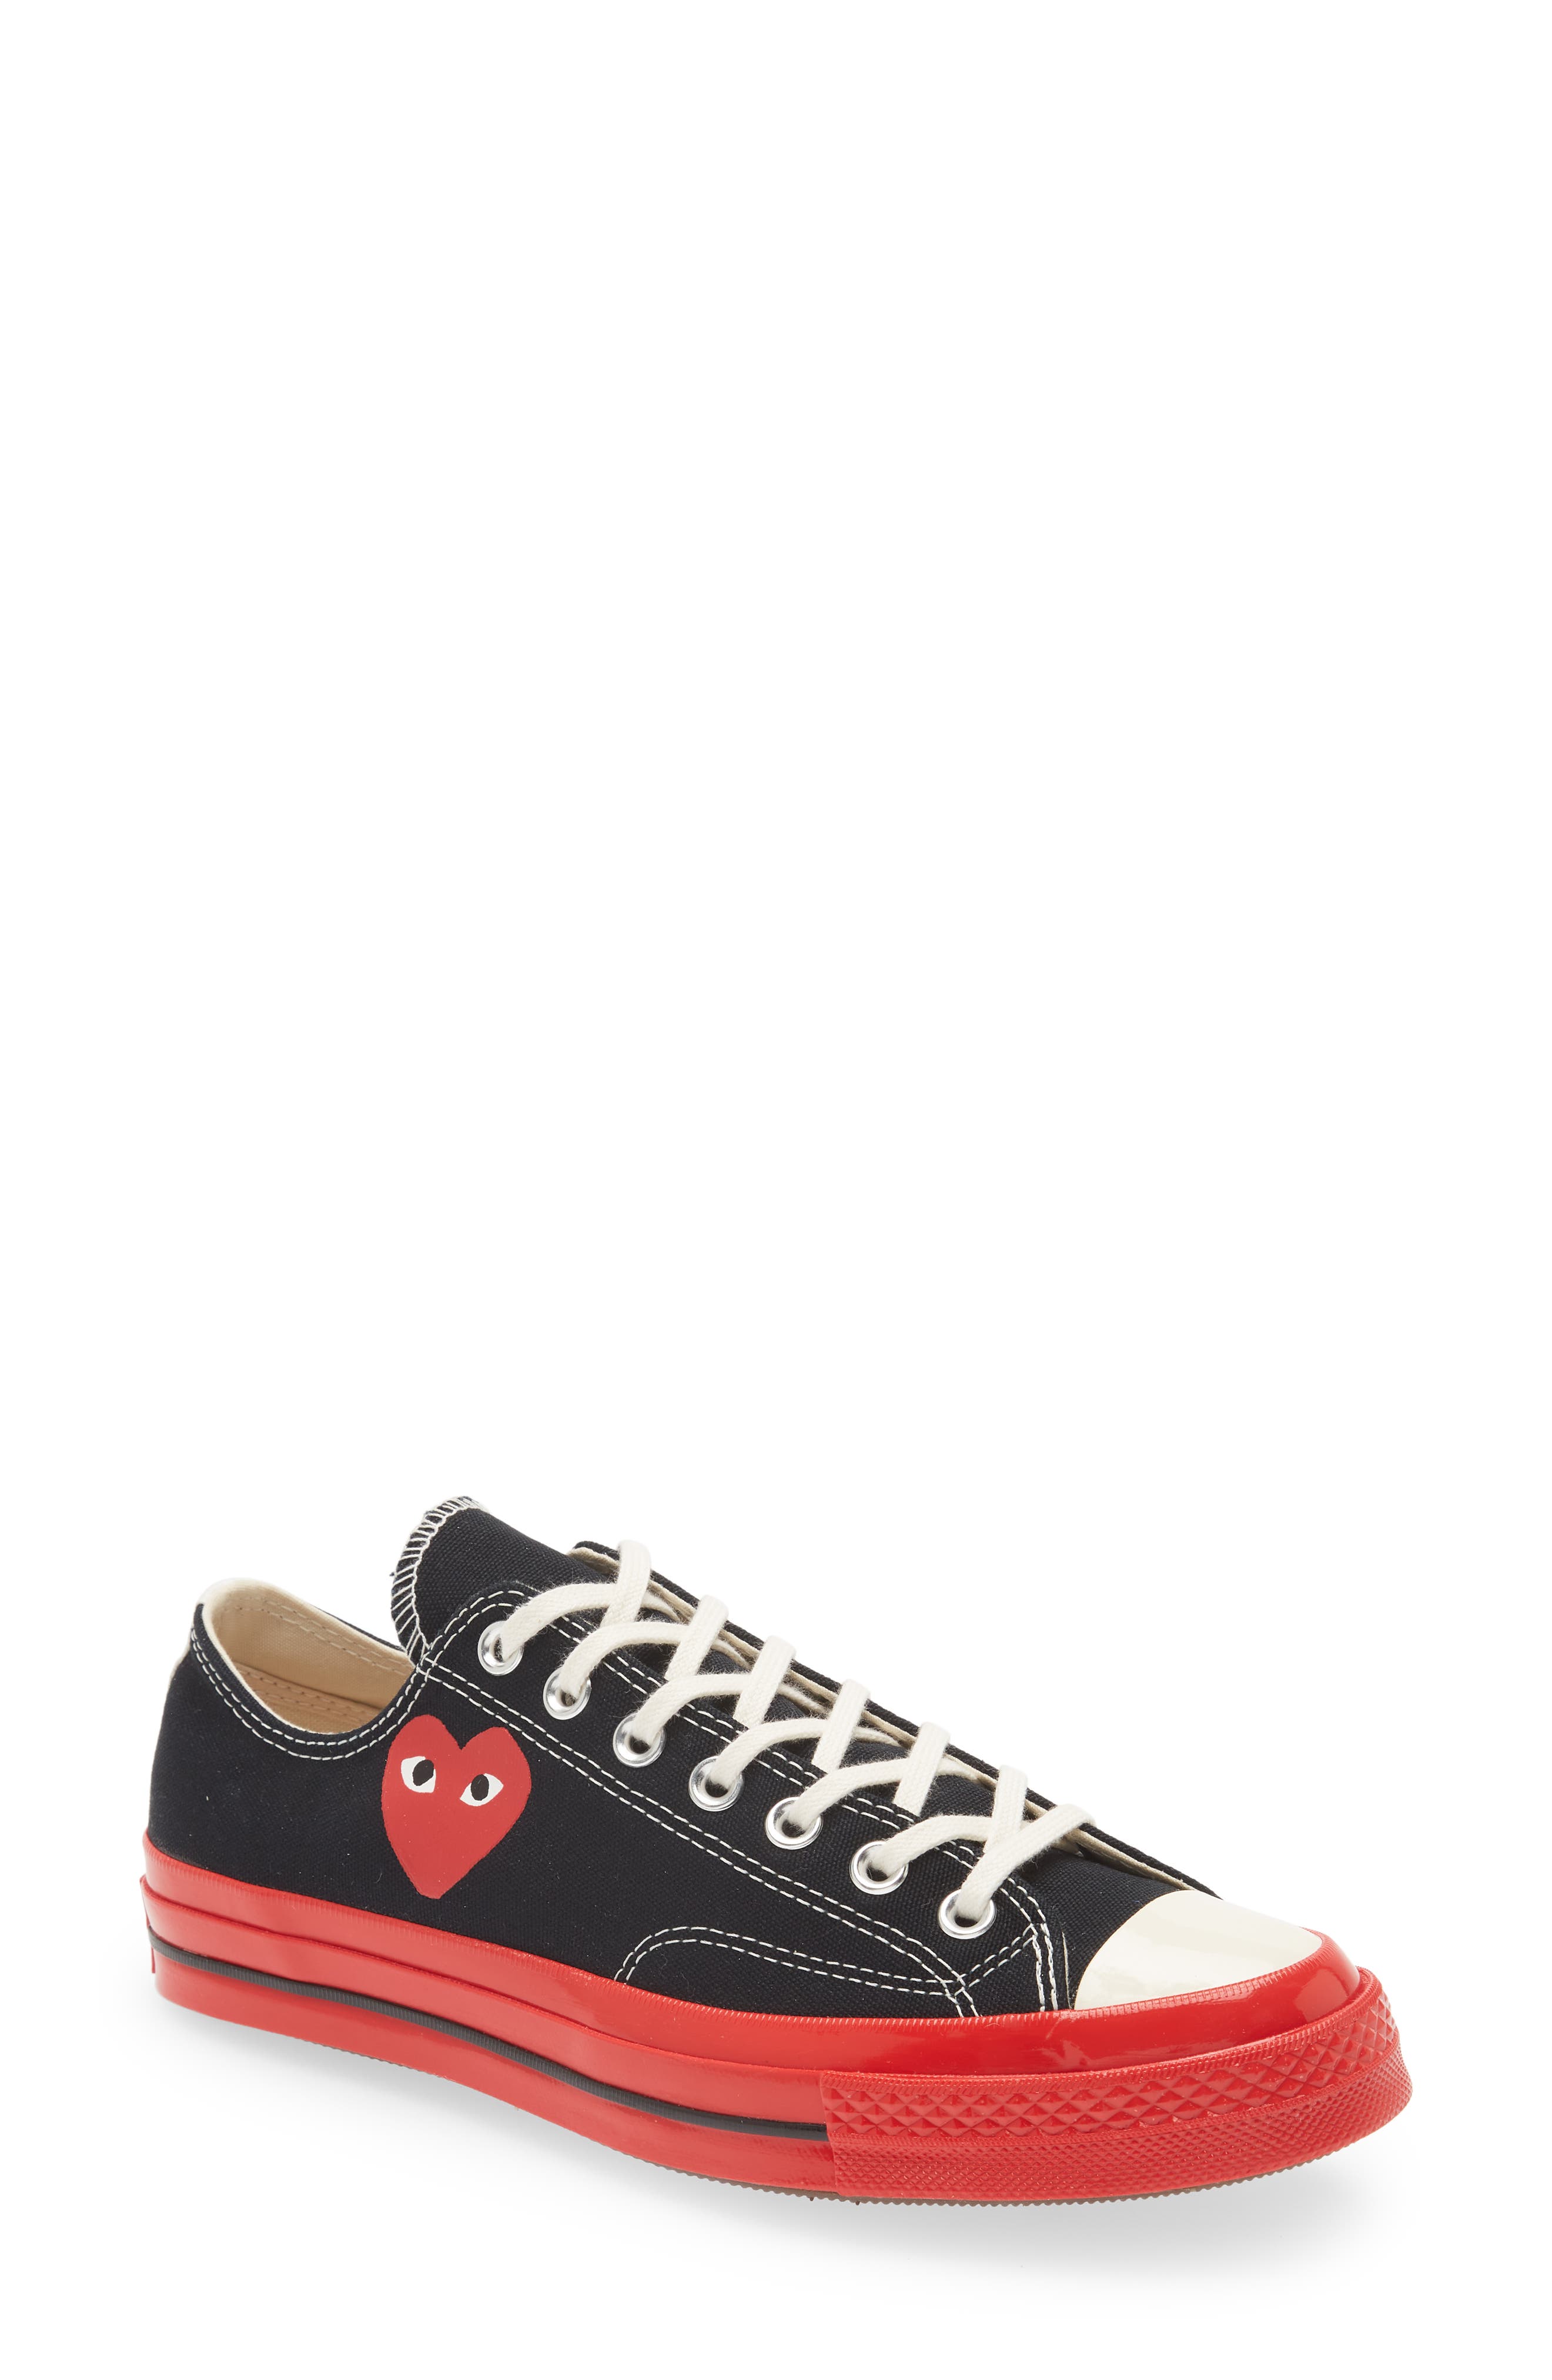 Comme des Garcons PLAY x Converse Chuck Taylor(R) Hidden Heart Red Sole Low Top Sneaker in White